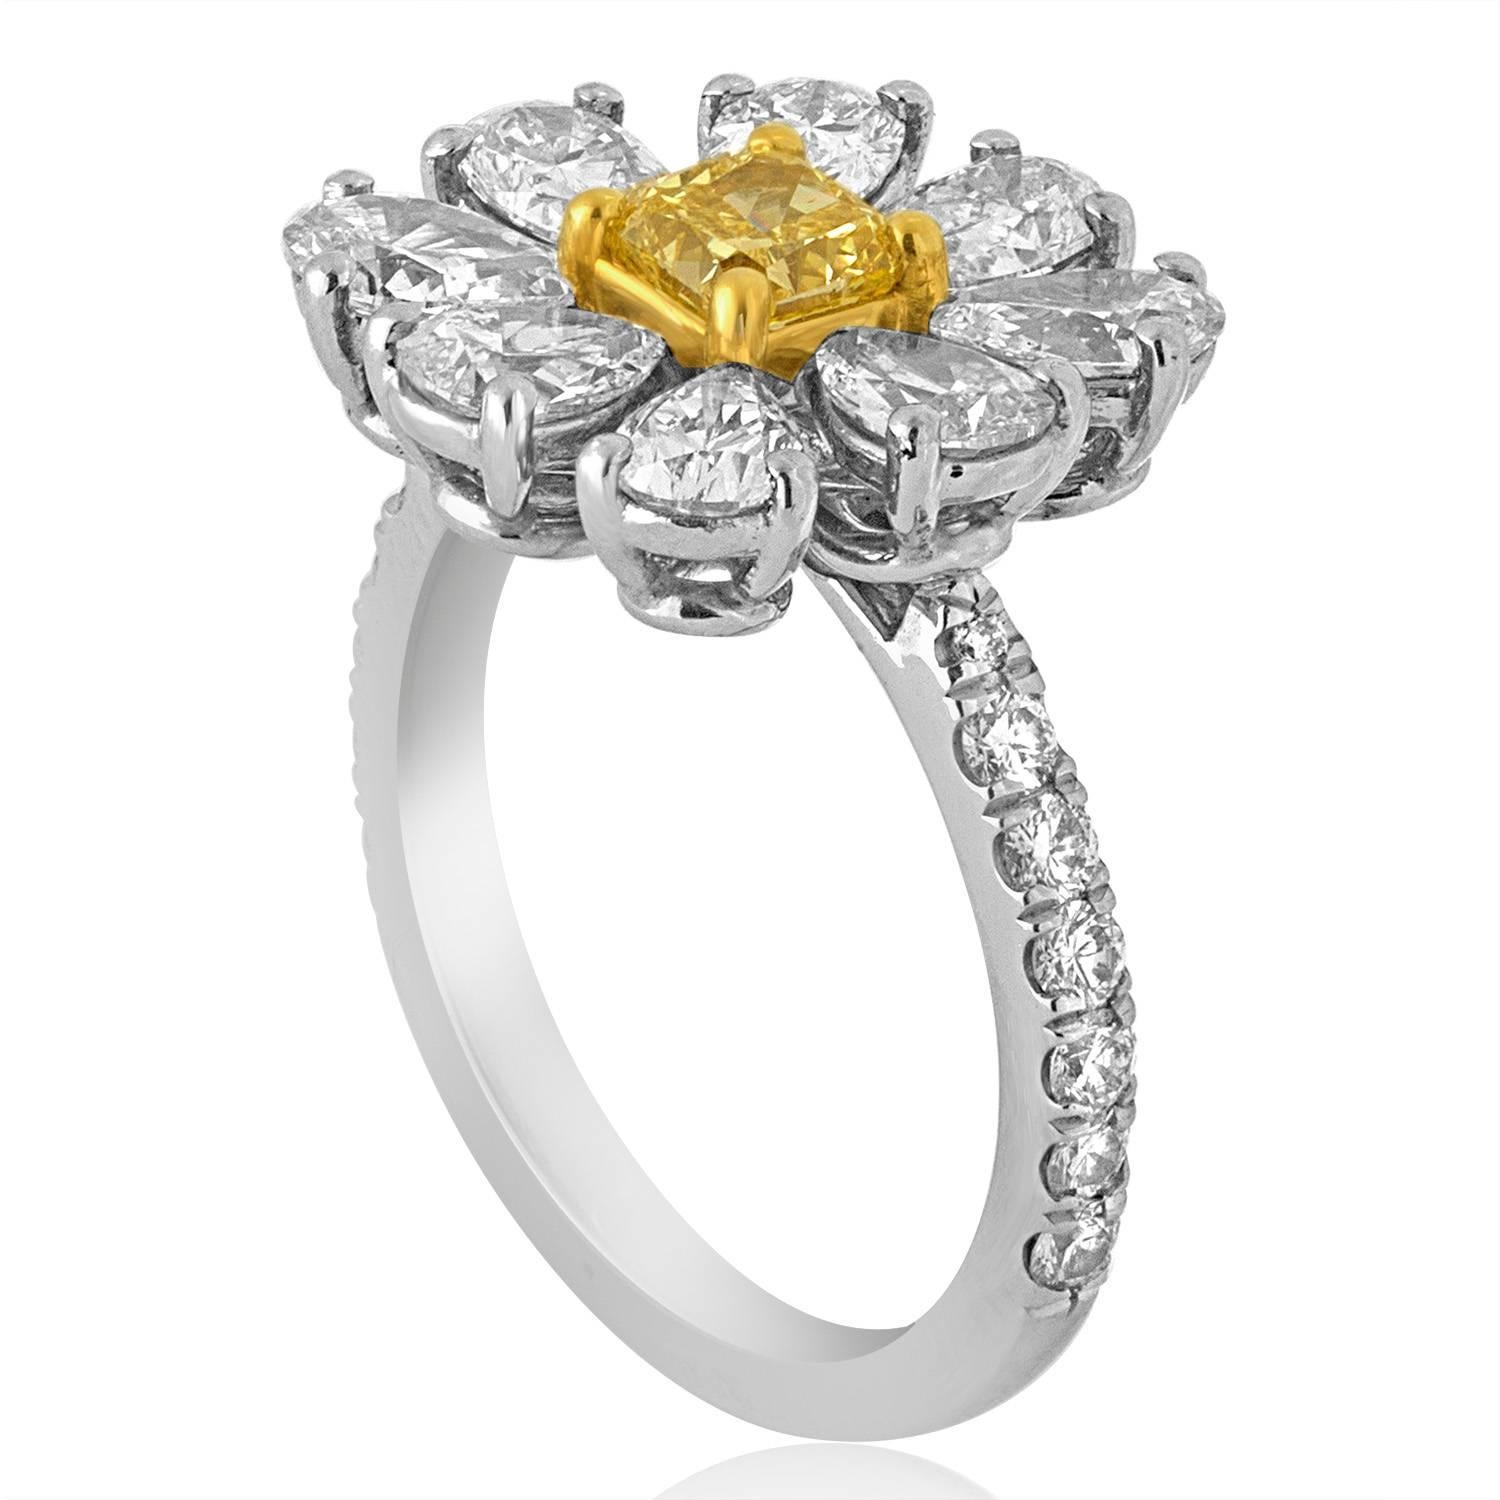 Daisy Flower Ring.
The Ring is Platinum 950 And 18K Yellow Gold.
The center stone is 0.87 Carats FANCY INTENSE YELLOW VS.
There are 1.92 Carats Total in Pear Shapes F VS.
There are 0.32 Carats Total in Small Round Diamonds F VS.
The ring measures